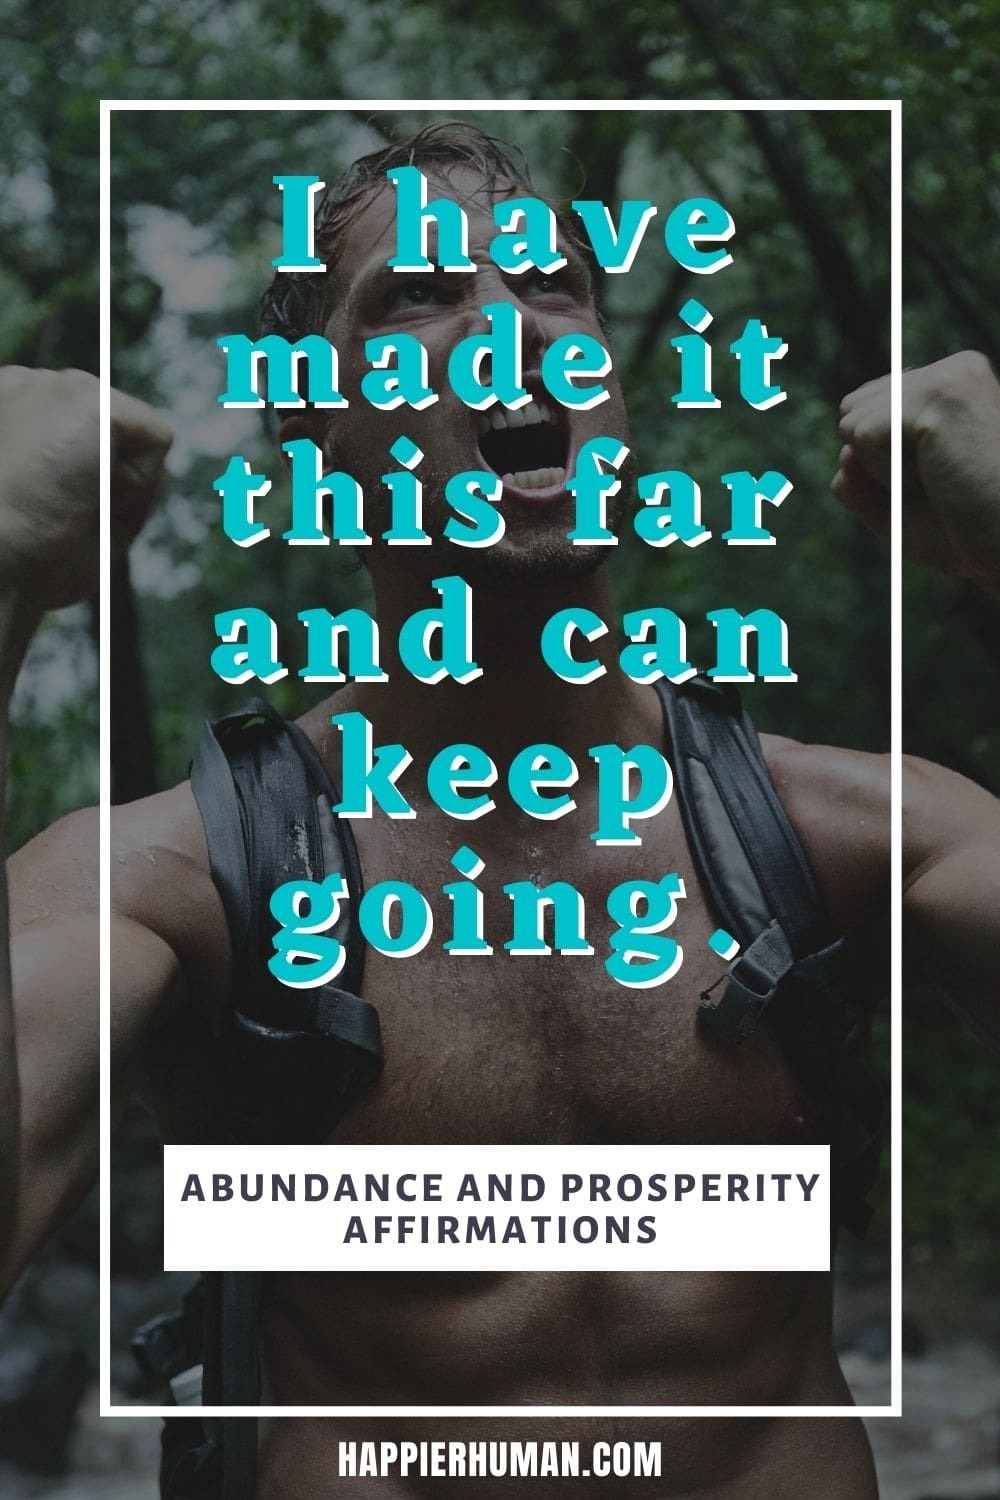 Abundance and Prosperity Affirmations - I have made it this far and can keep going. | abundance quotes and affirmations | affirmations for success and abundance | affirmations for abundance and love #dailyaffirmations #affirmation #sayings